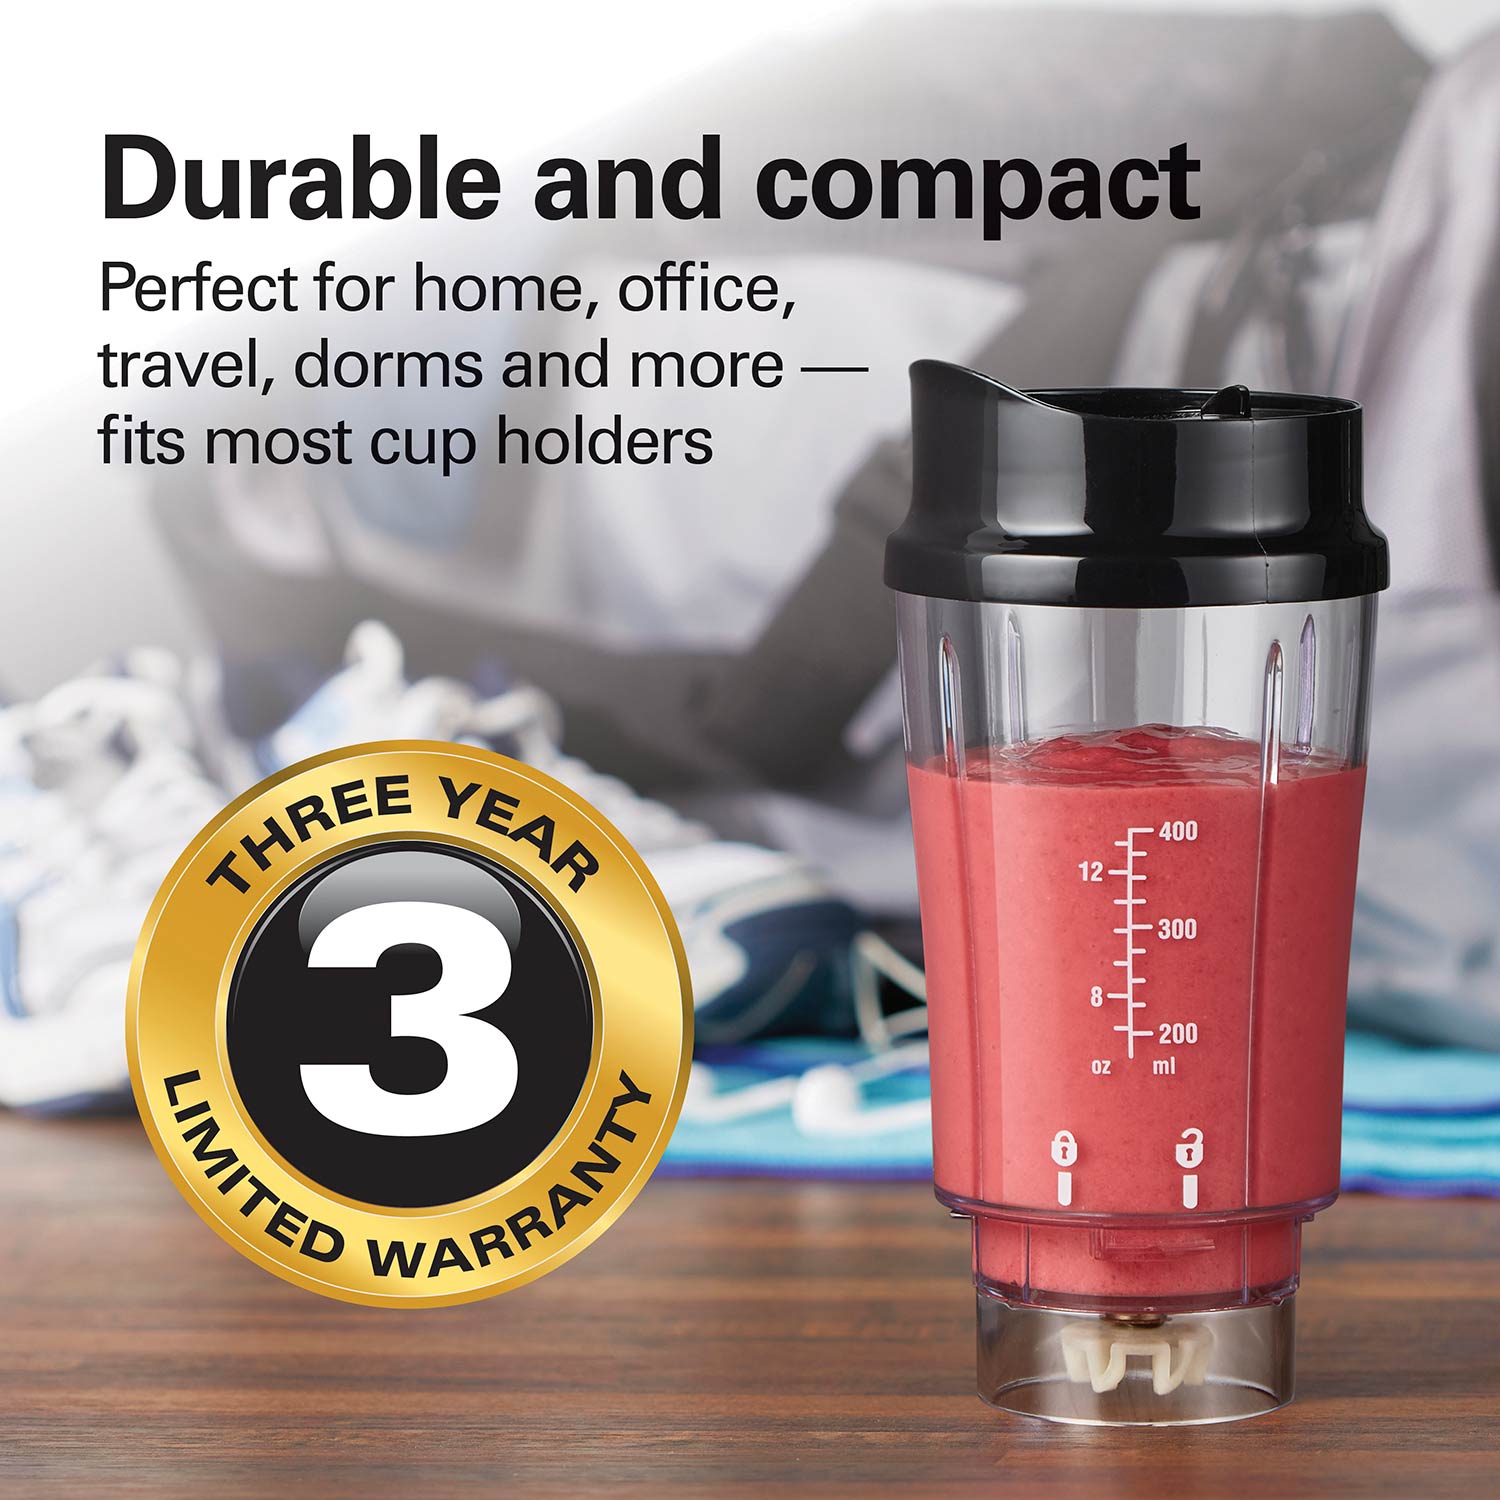 American Stores - The Hamilton Beach Personal creations blender with travel  lid lets you blend and run. No need to spend extra money on larger blenders  with added bells and whistles, when